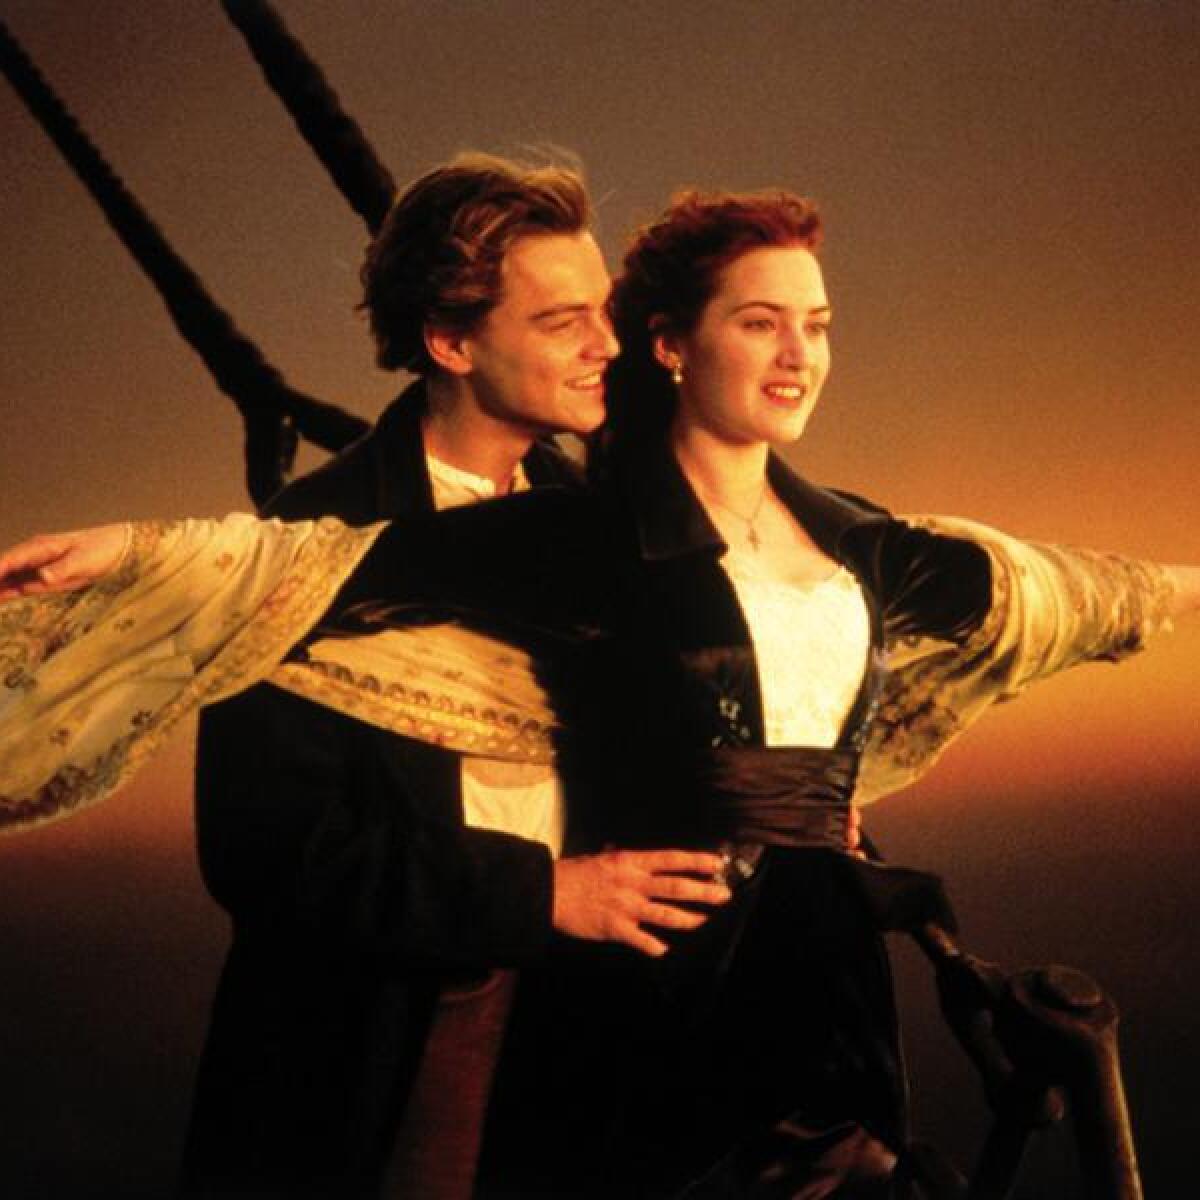 Image from the film Titanic